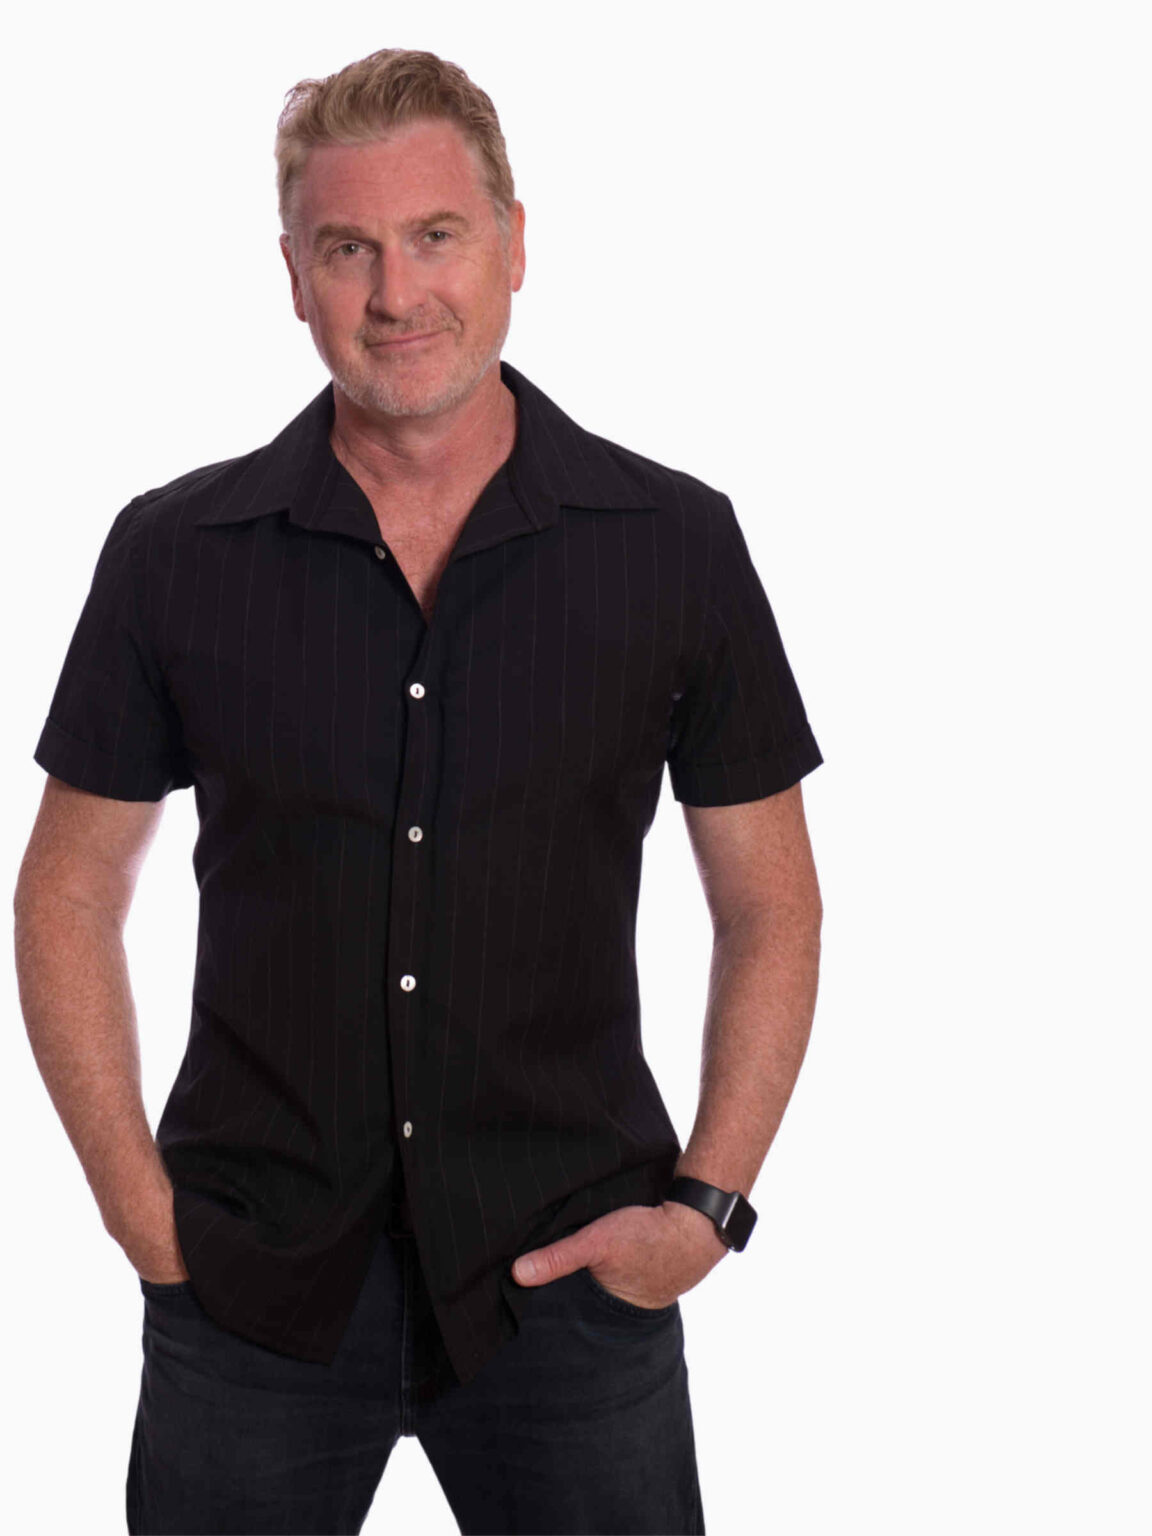 David Kaye is a legendary voice actor. Learn more about his talents and his career here.